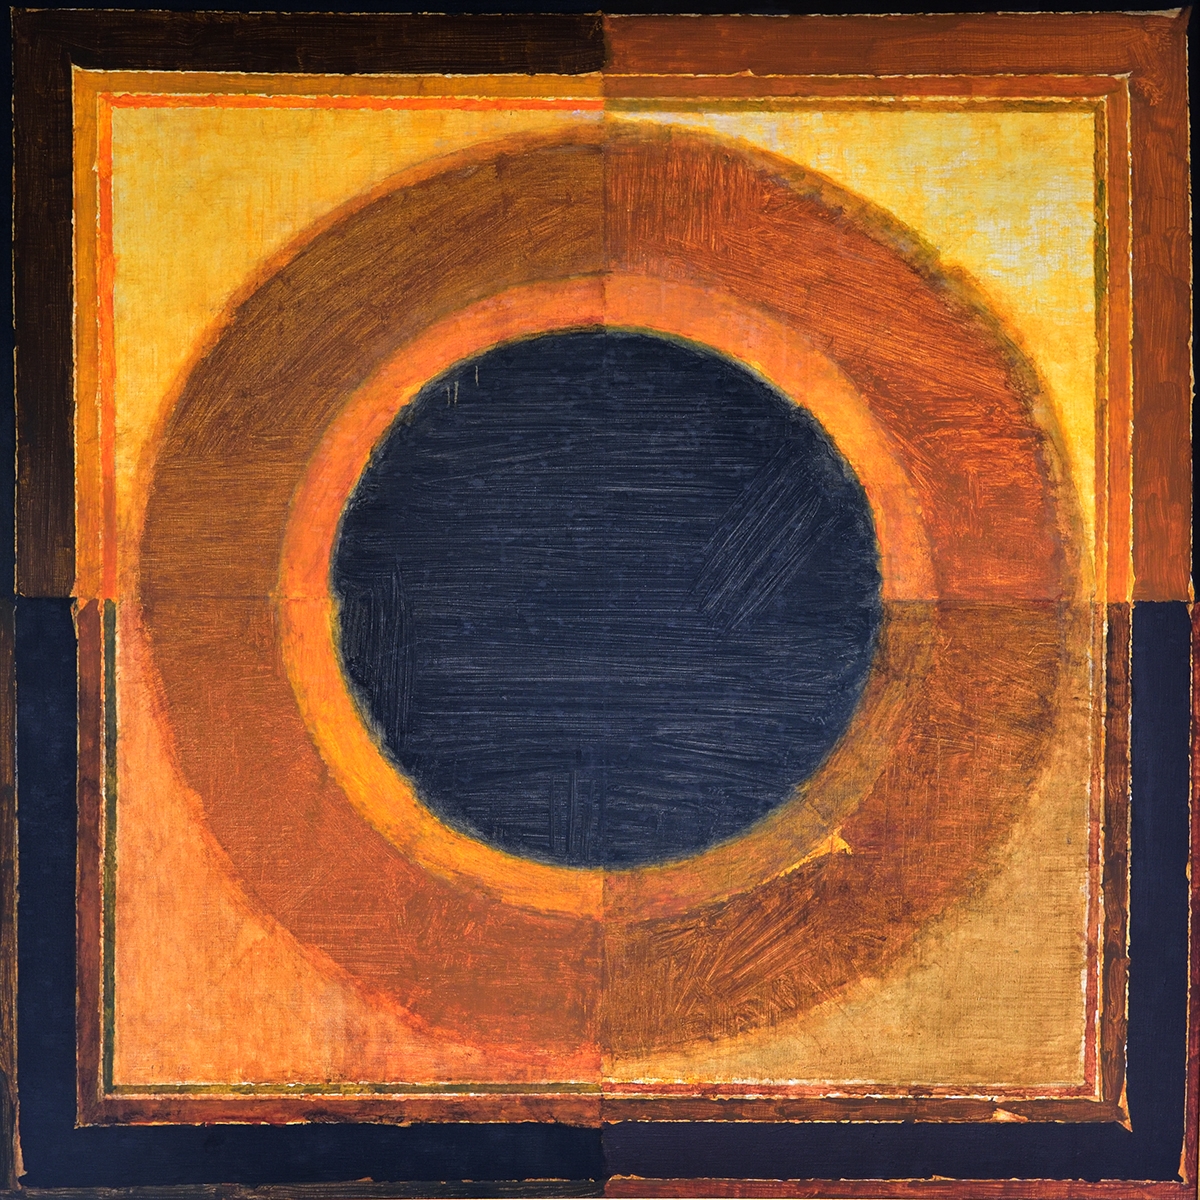 S. H. Raza. Bindu, ca. 1980s. Oil on canvas. H. 39 x W. 39 in. (99 x 99 cm). Collection of Jamshyd and Pheroza Godrej. Courtesy of the lender 